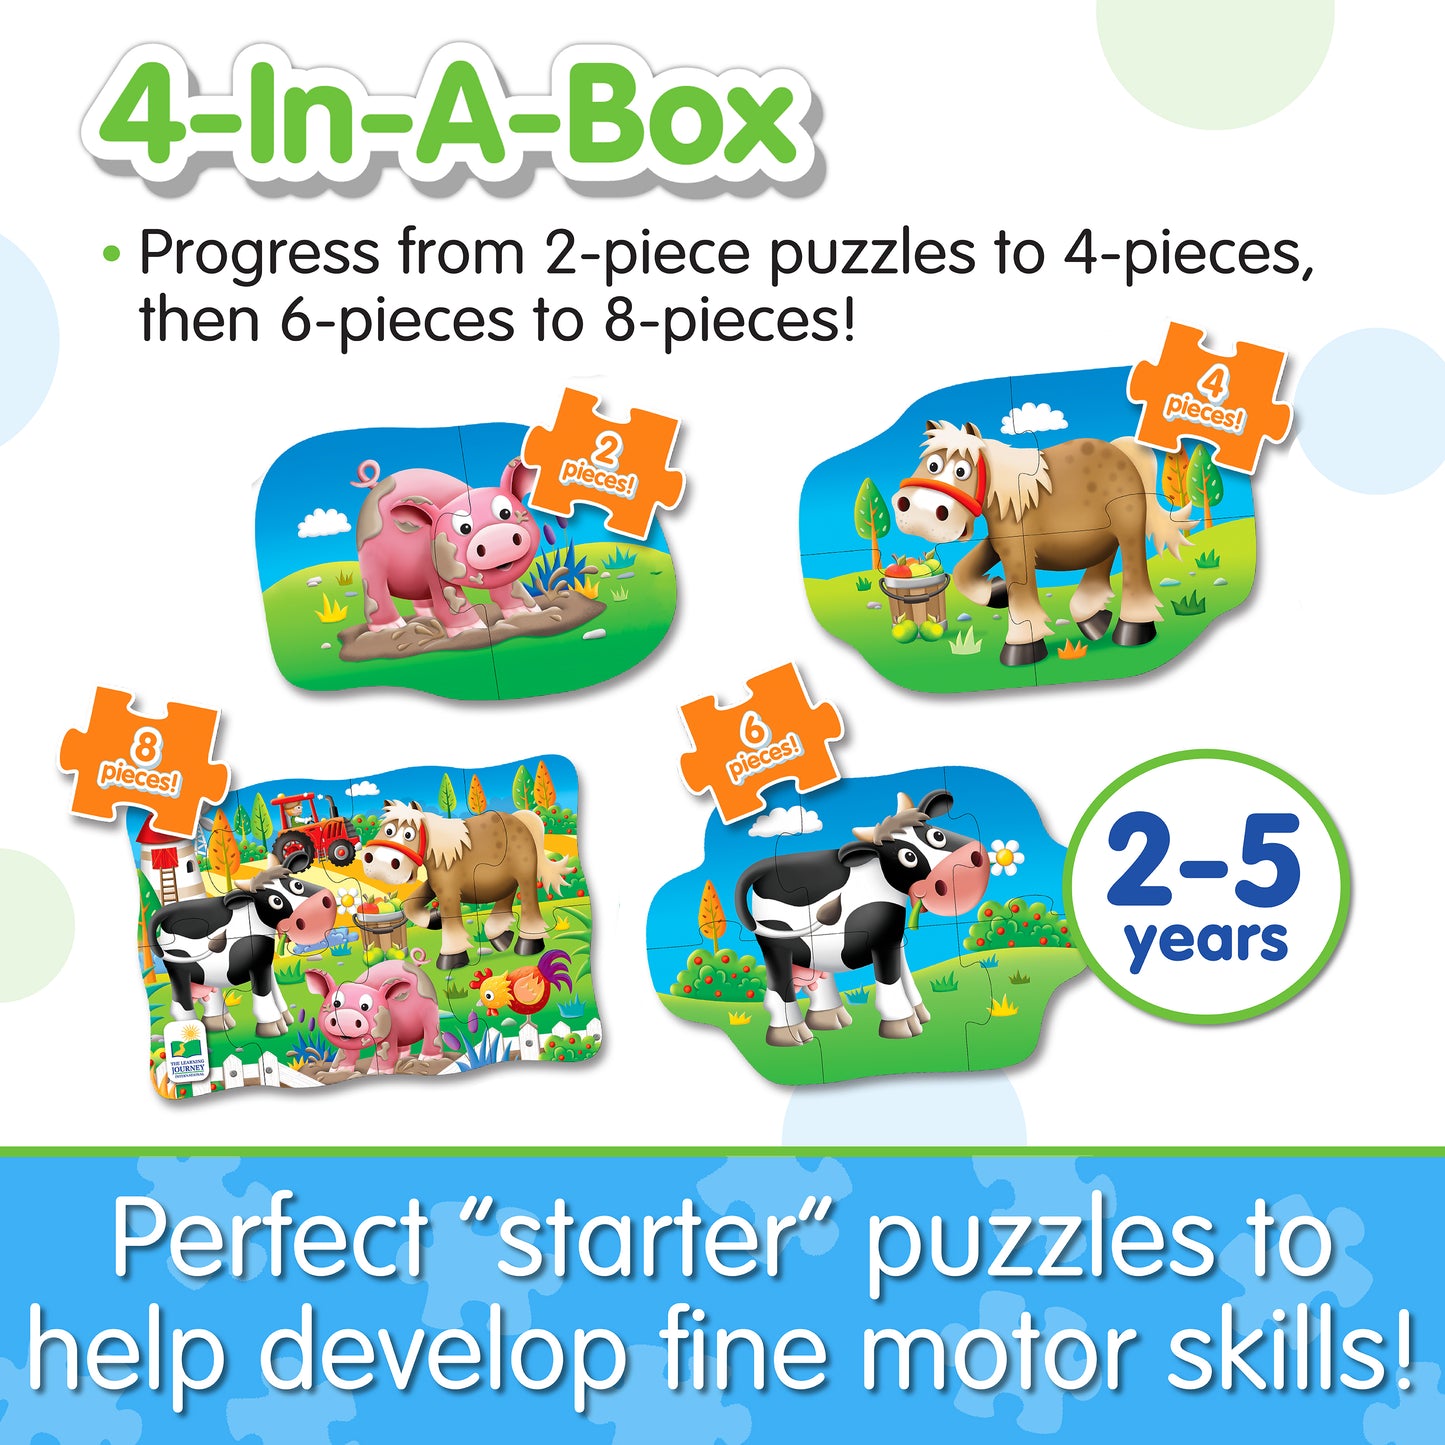 Infographic about 4-In-A-Box Farm Puzzle's features that says, "Perfect 'starter' puzzles to help develop fine motor skills!"